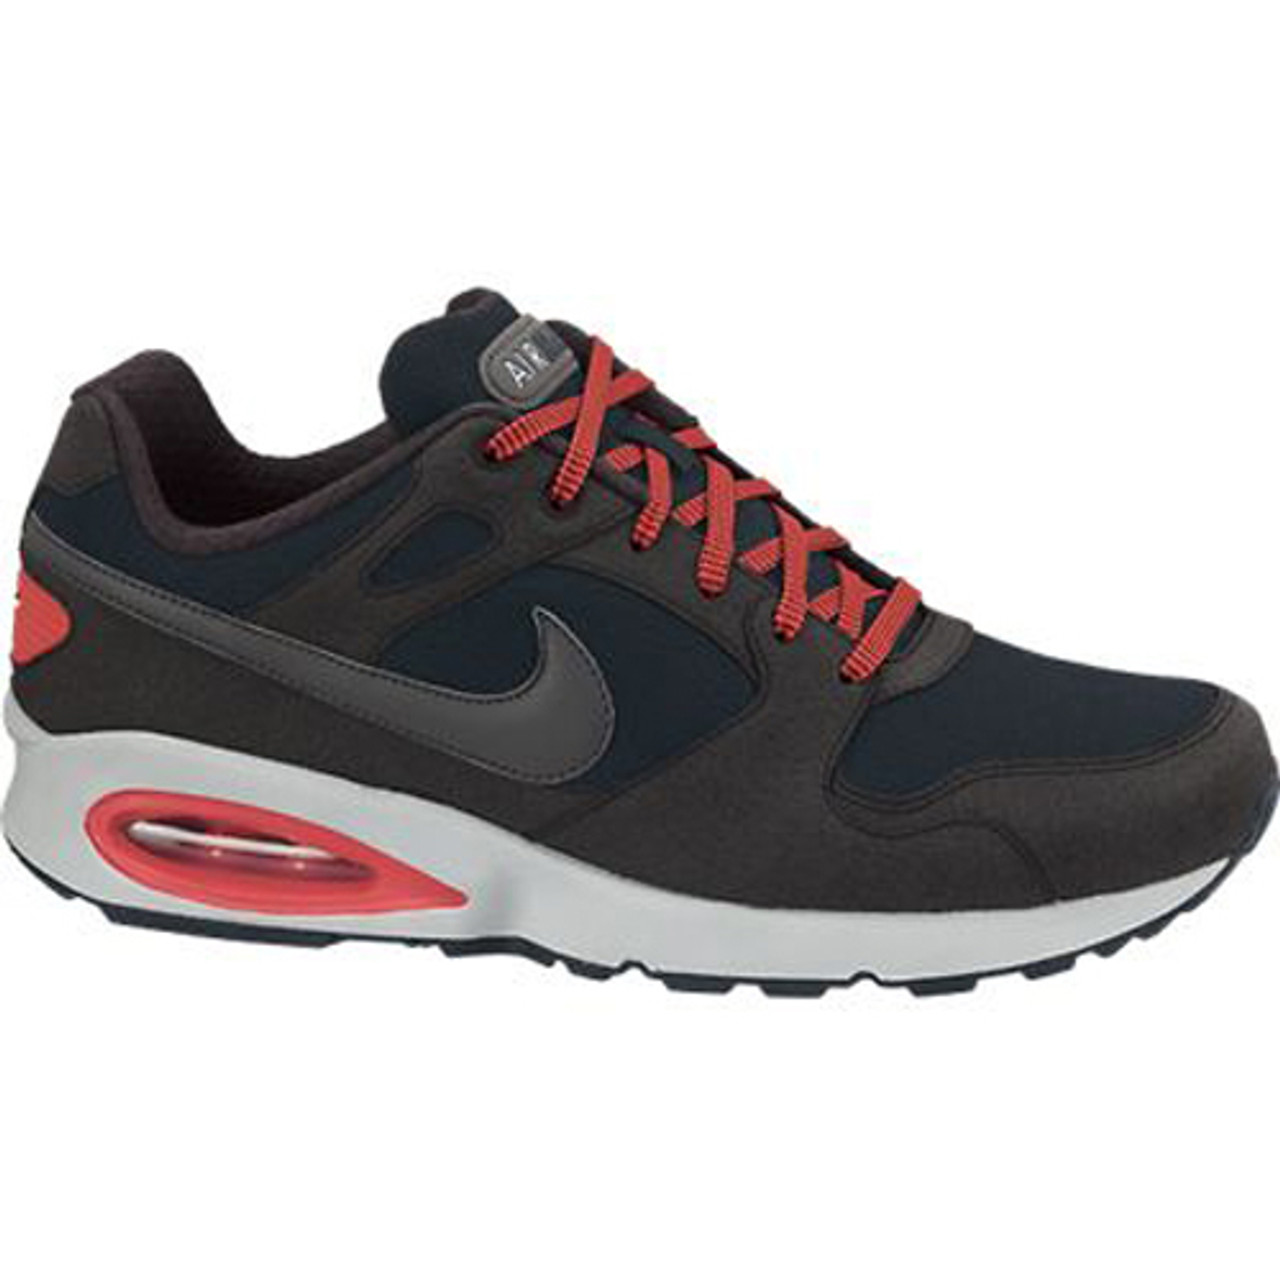 New Nike Air Max Coliseum Racer Leather Black/Red Mens Running Shoes - Black/Challenge Red/Anthracite/Dark Grey Discount Nike Men's Athletic & More - | Shoolu.com